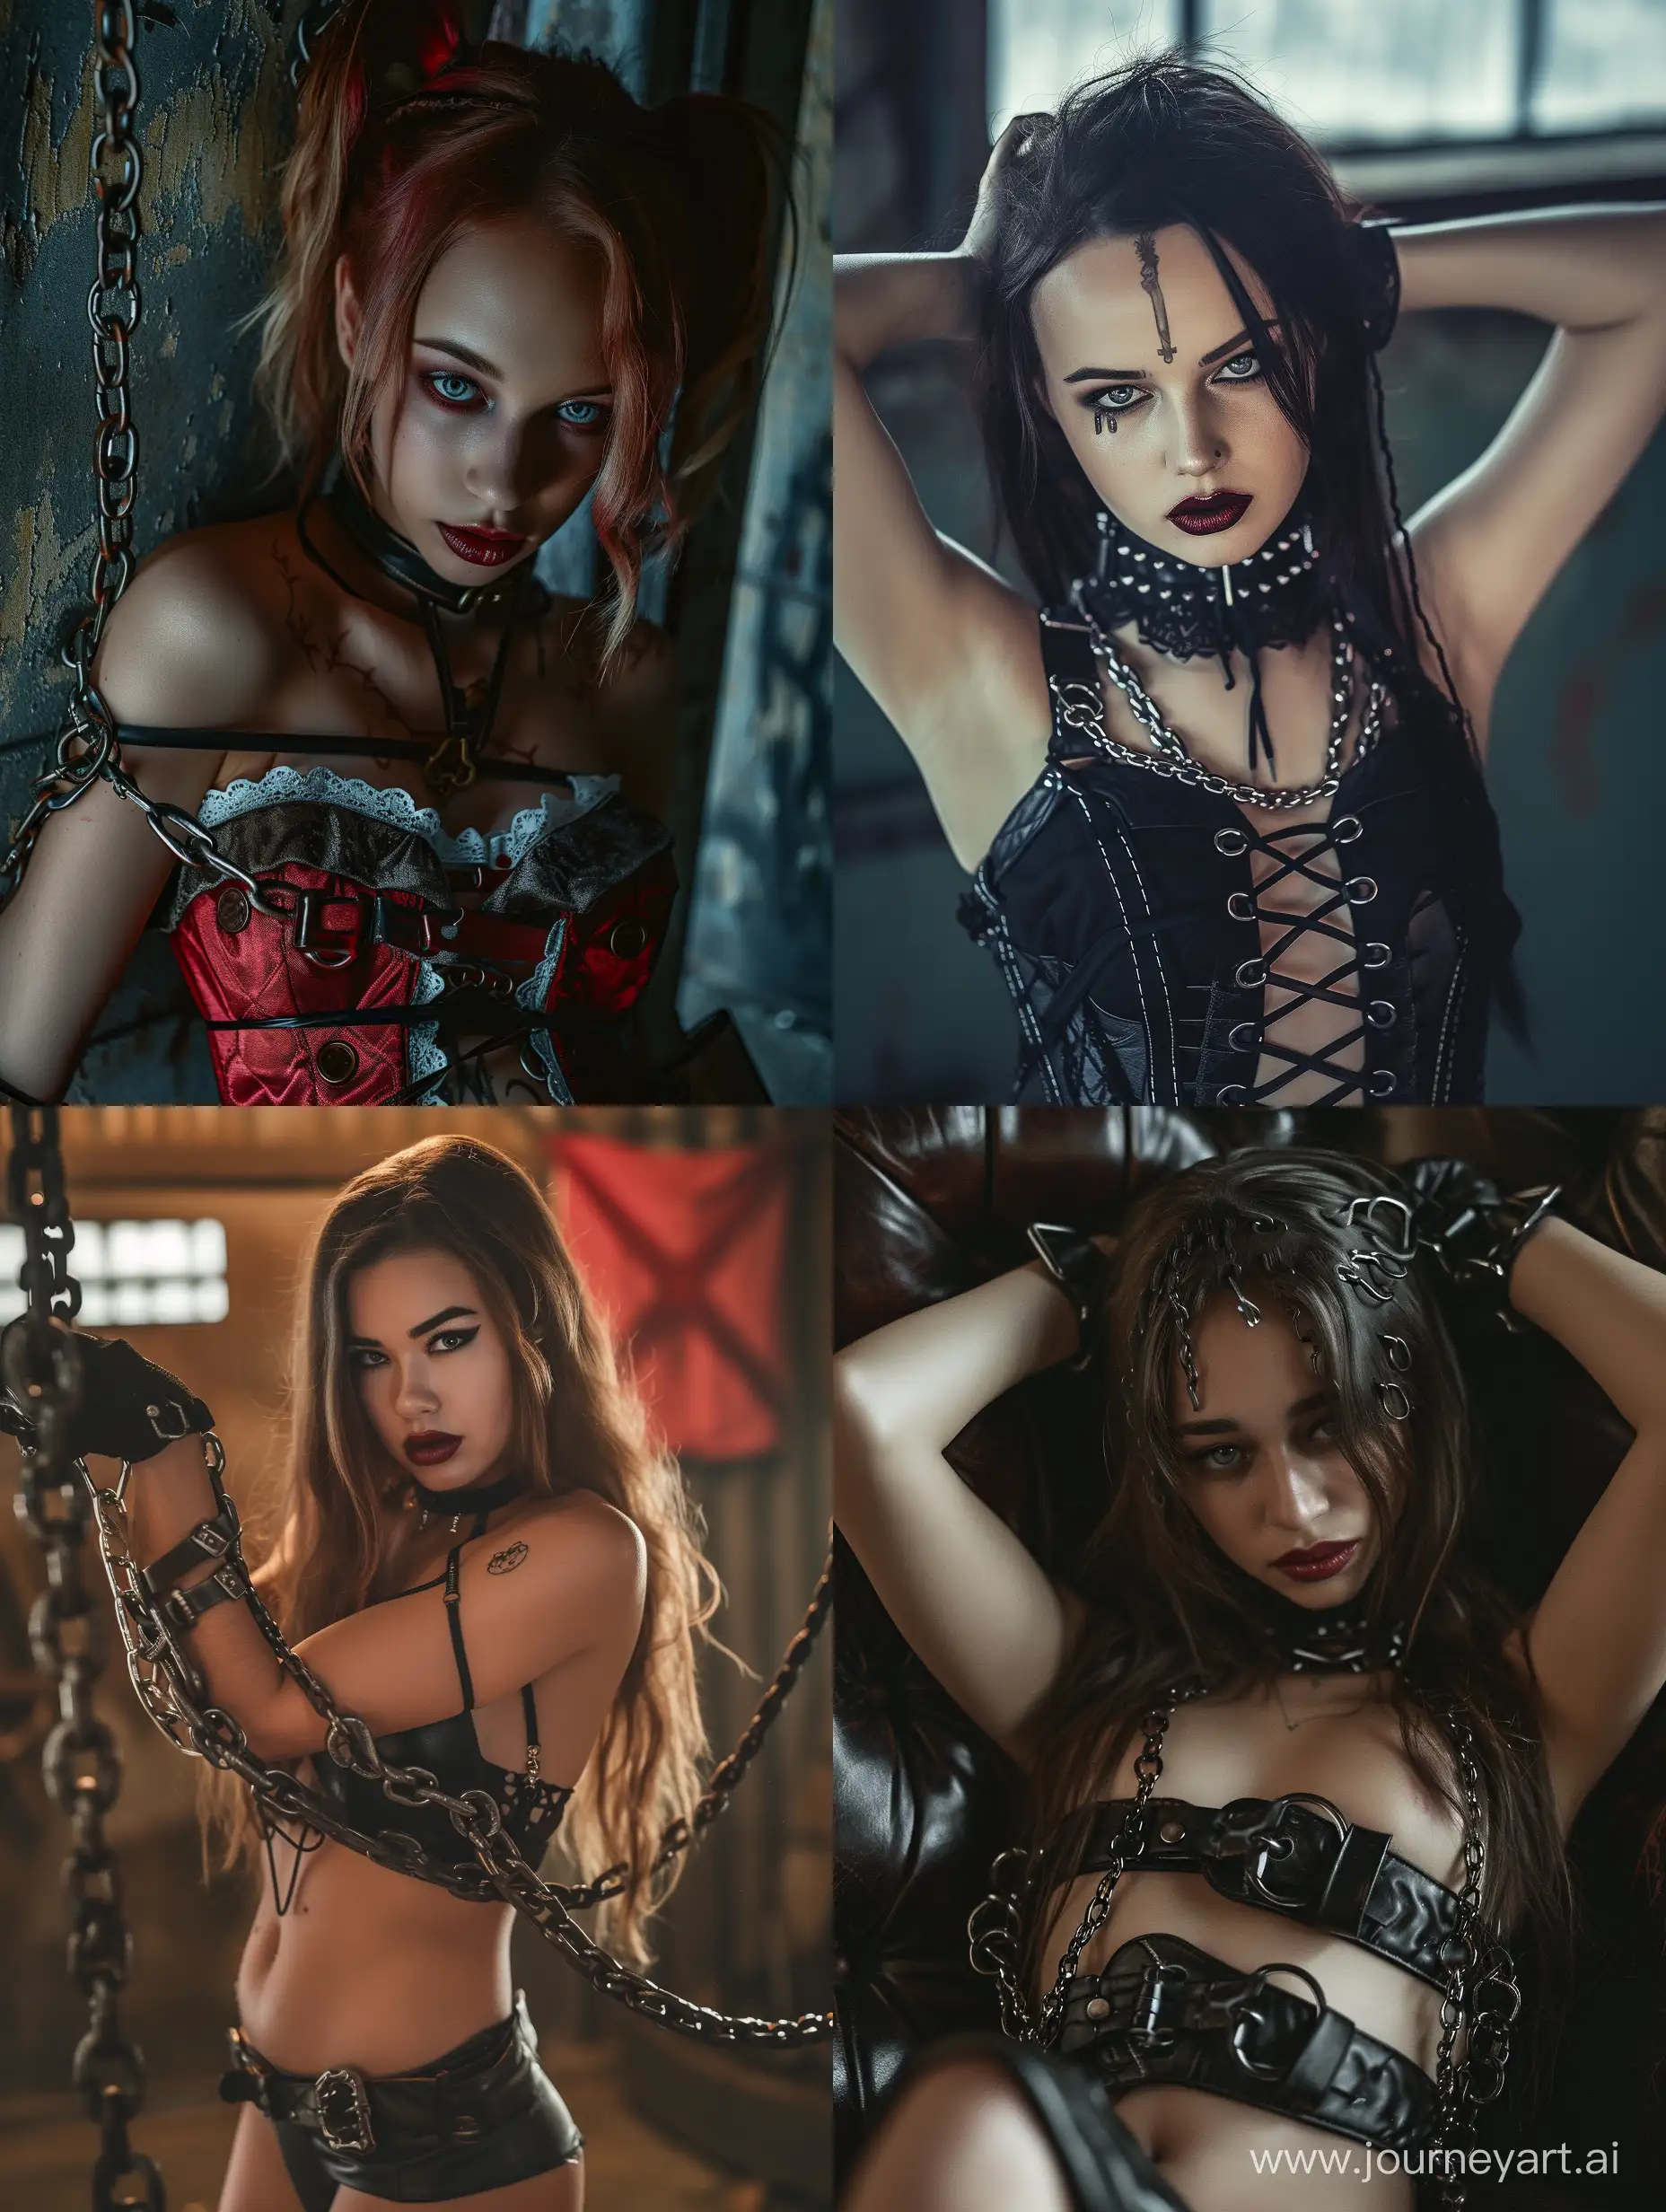 Beautiful young woman with body_modz, chains, nightmare fuel, unique, Canon EOS 5D Mark IV DSLR, f/5. 6 aperture, ISO 100, attention to detail